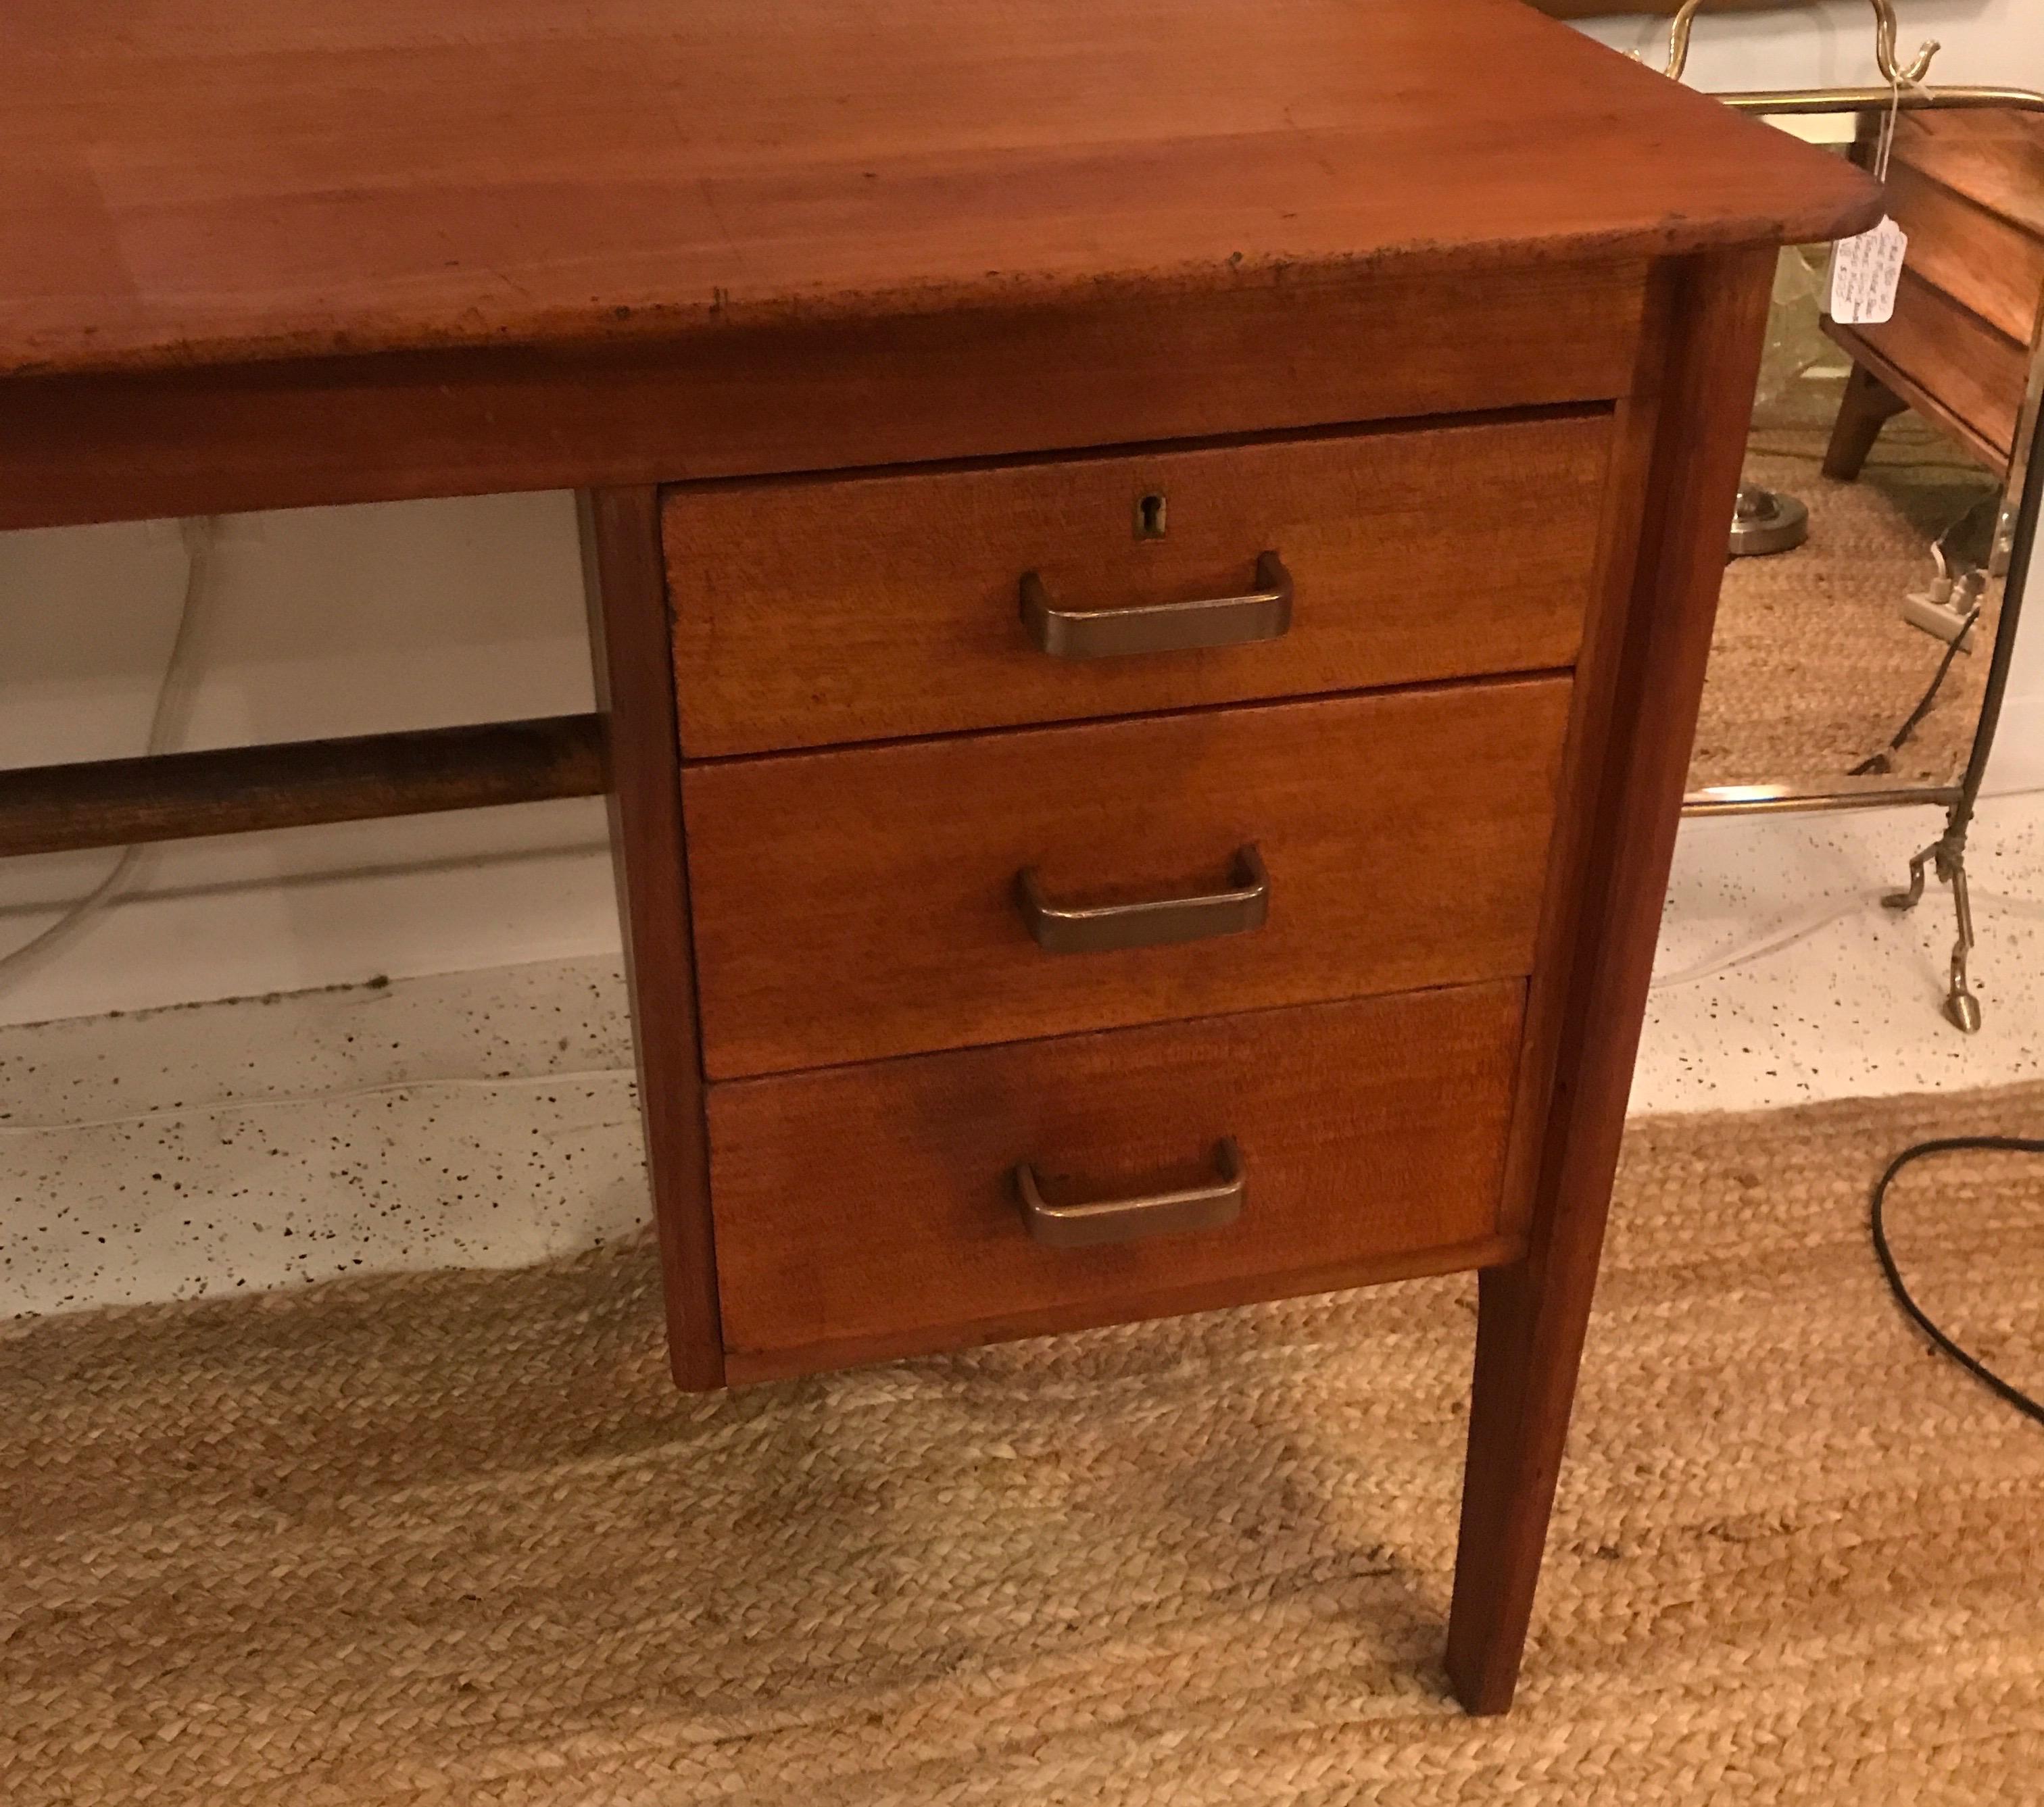 A craftsman made Mid-Century Modern desk by Gordon Russell, England 1950. The midcentury style desk with simple rectangular top with three side drawers with brass handles. Rare English midcentury piece.